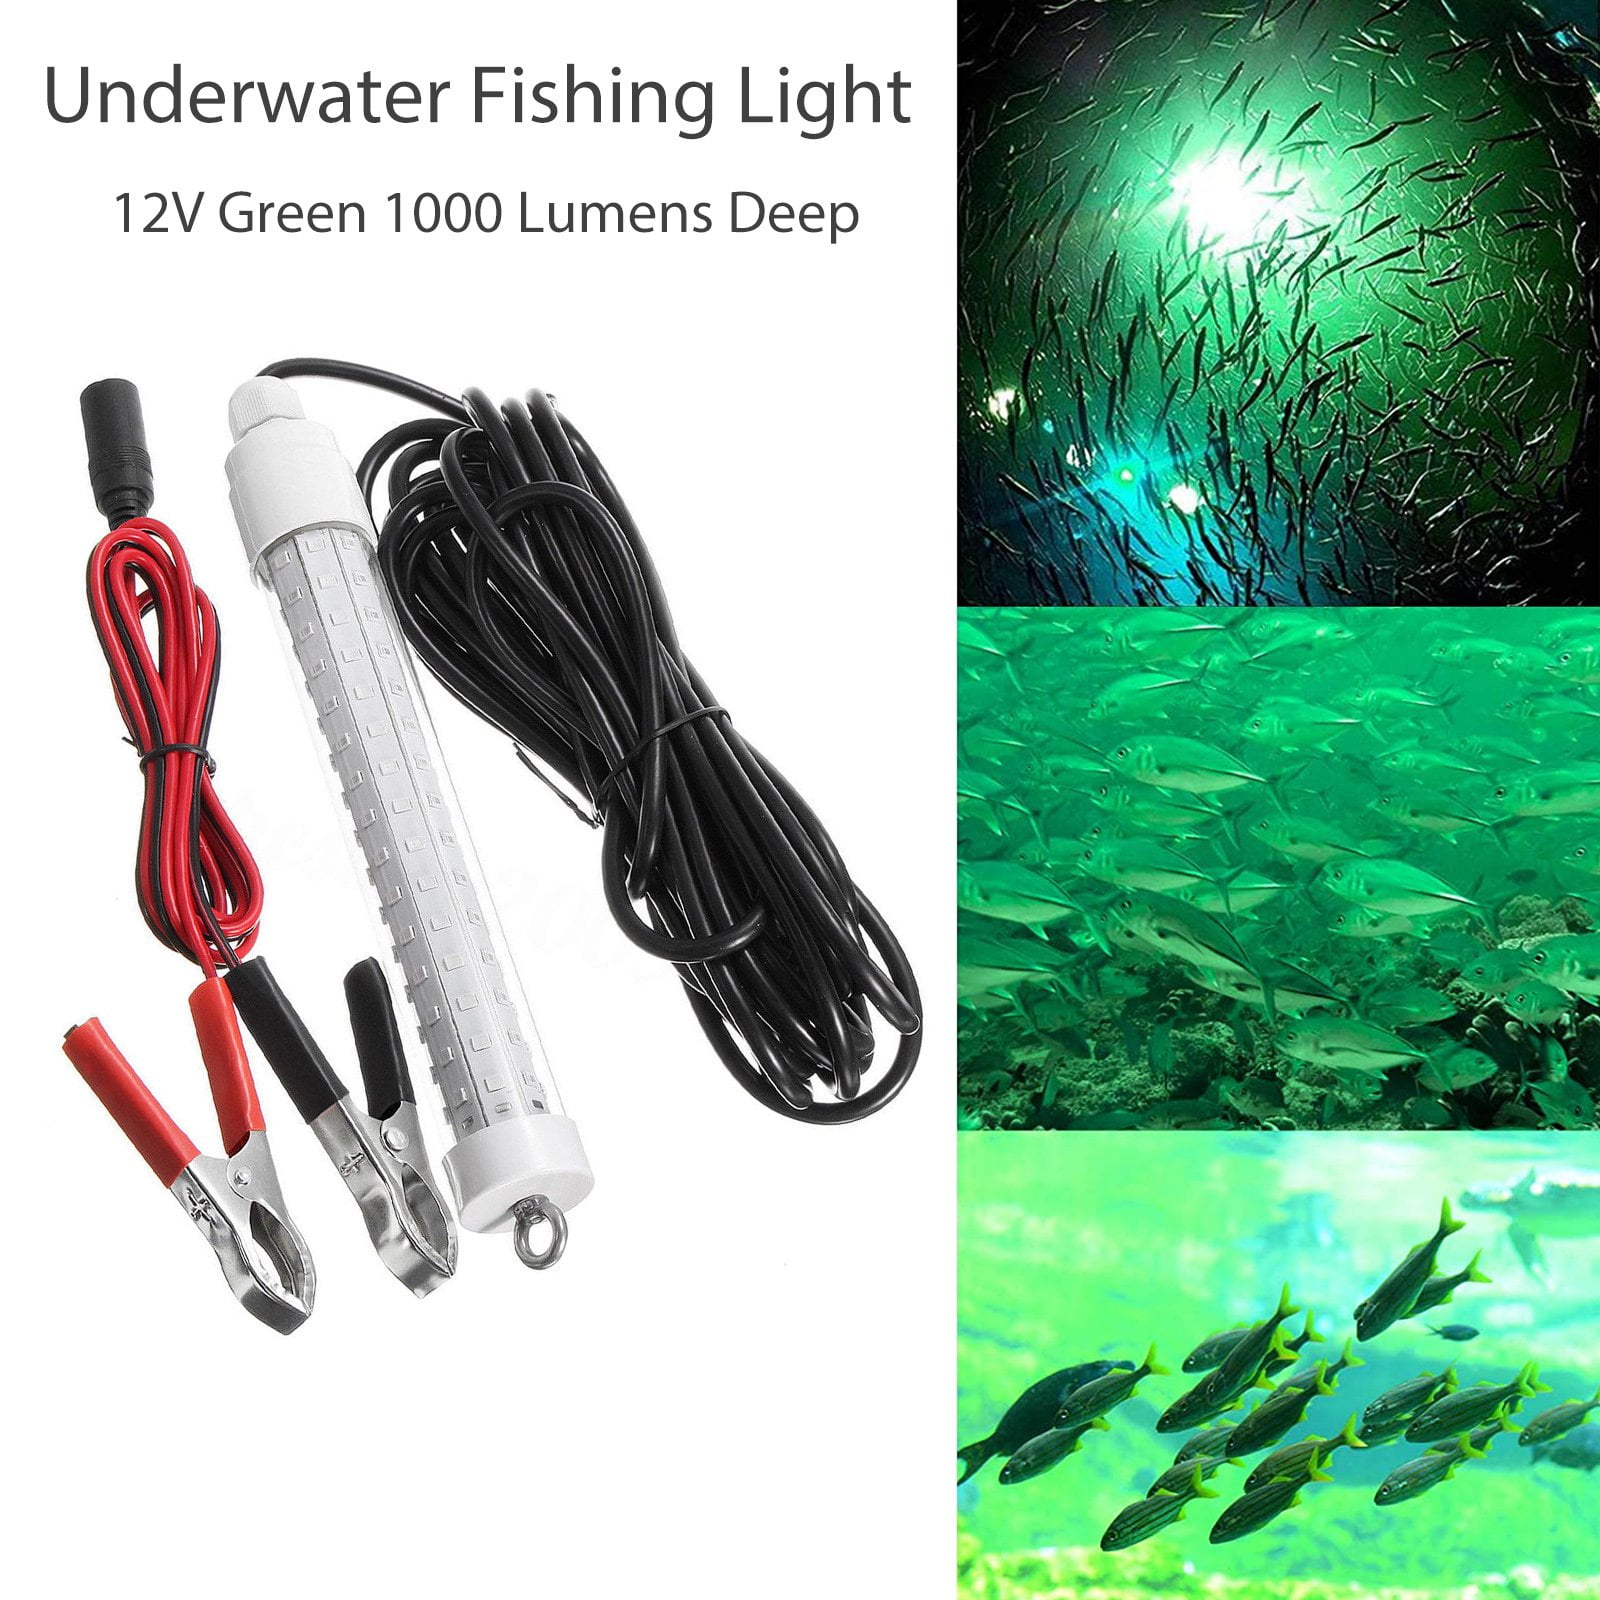 12V Green LED Underwater Submersible Fishing Light Night Crappie Shad Squid Lamp 